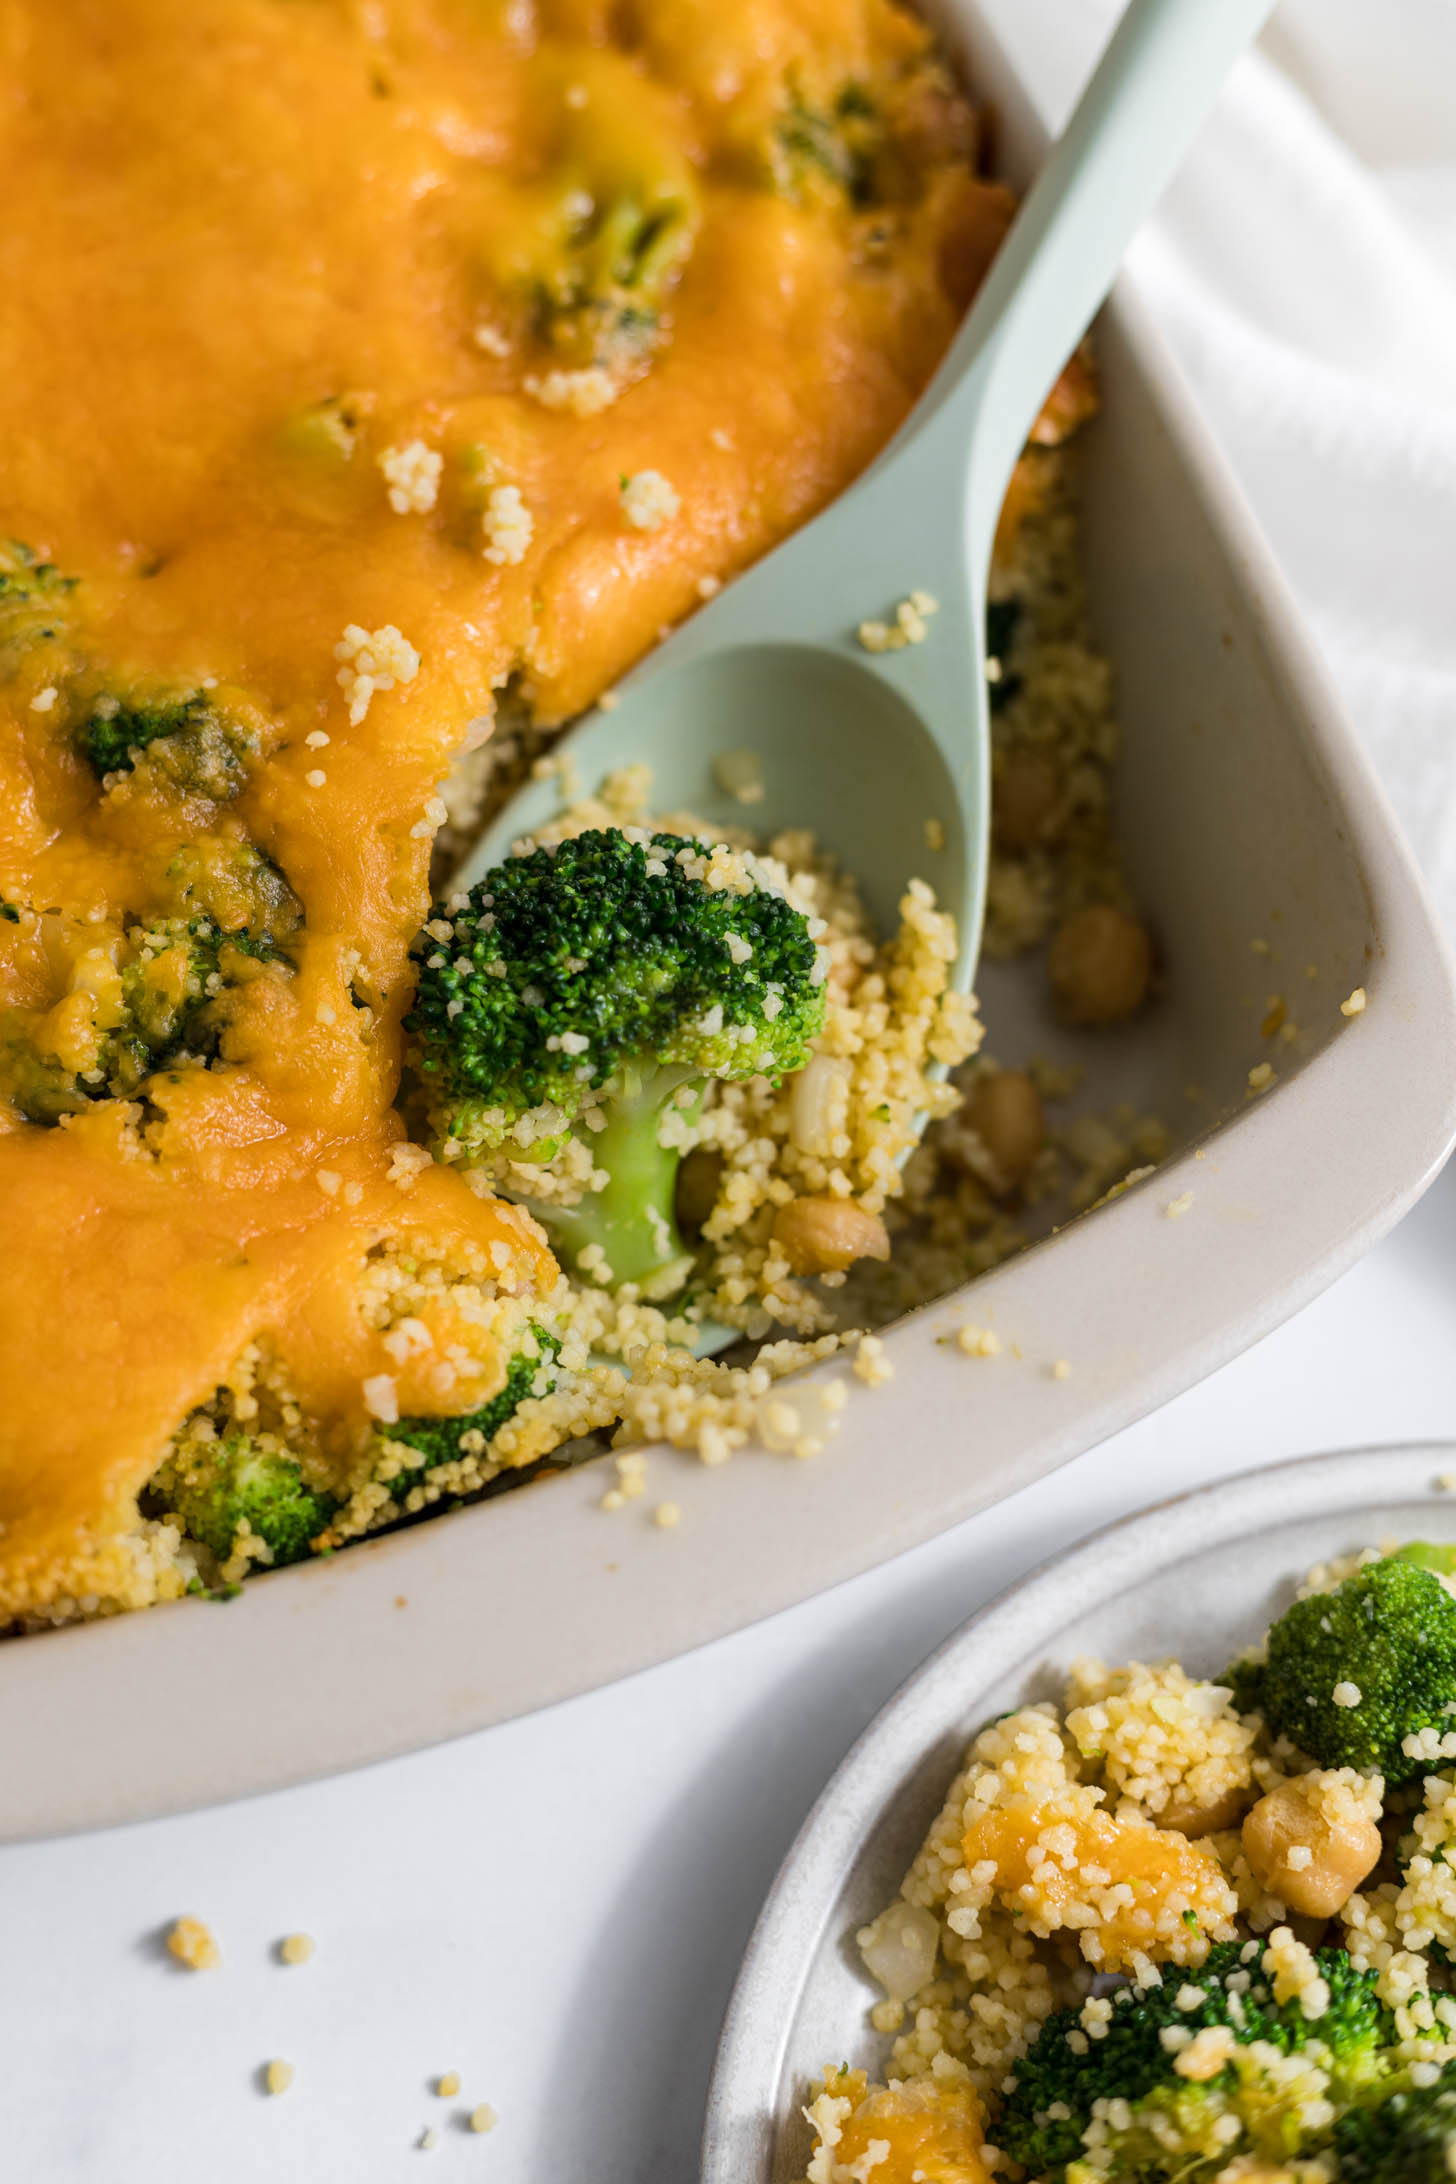 A serving spoon scooping out couscous and broccoli.